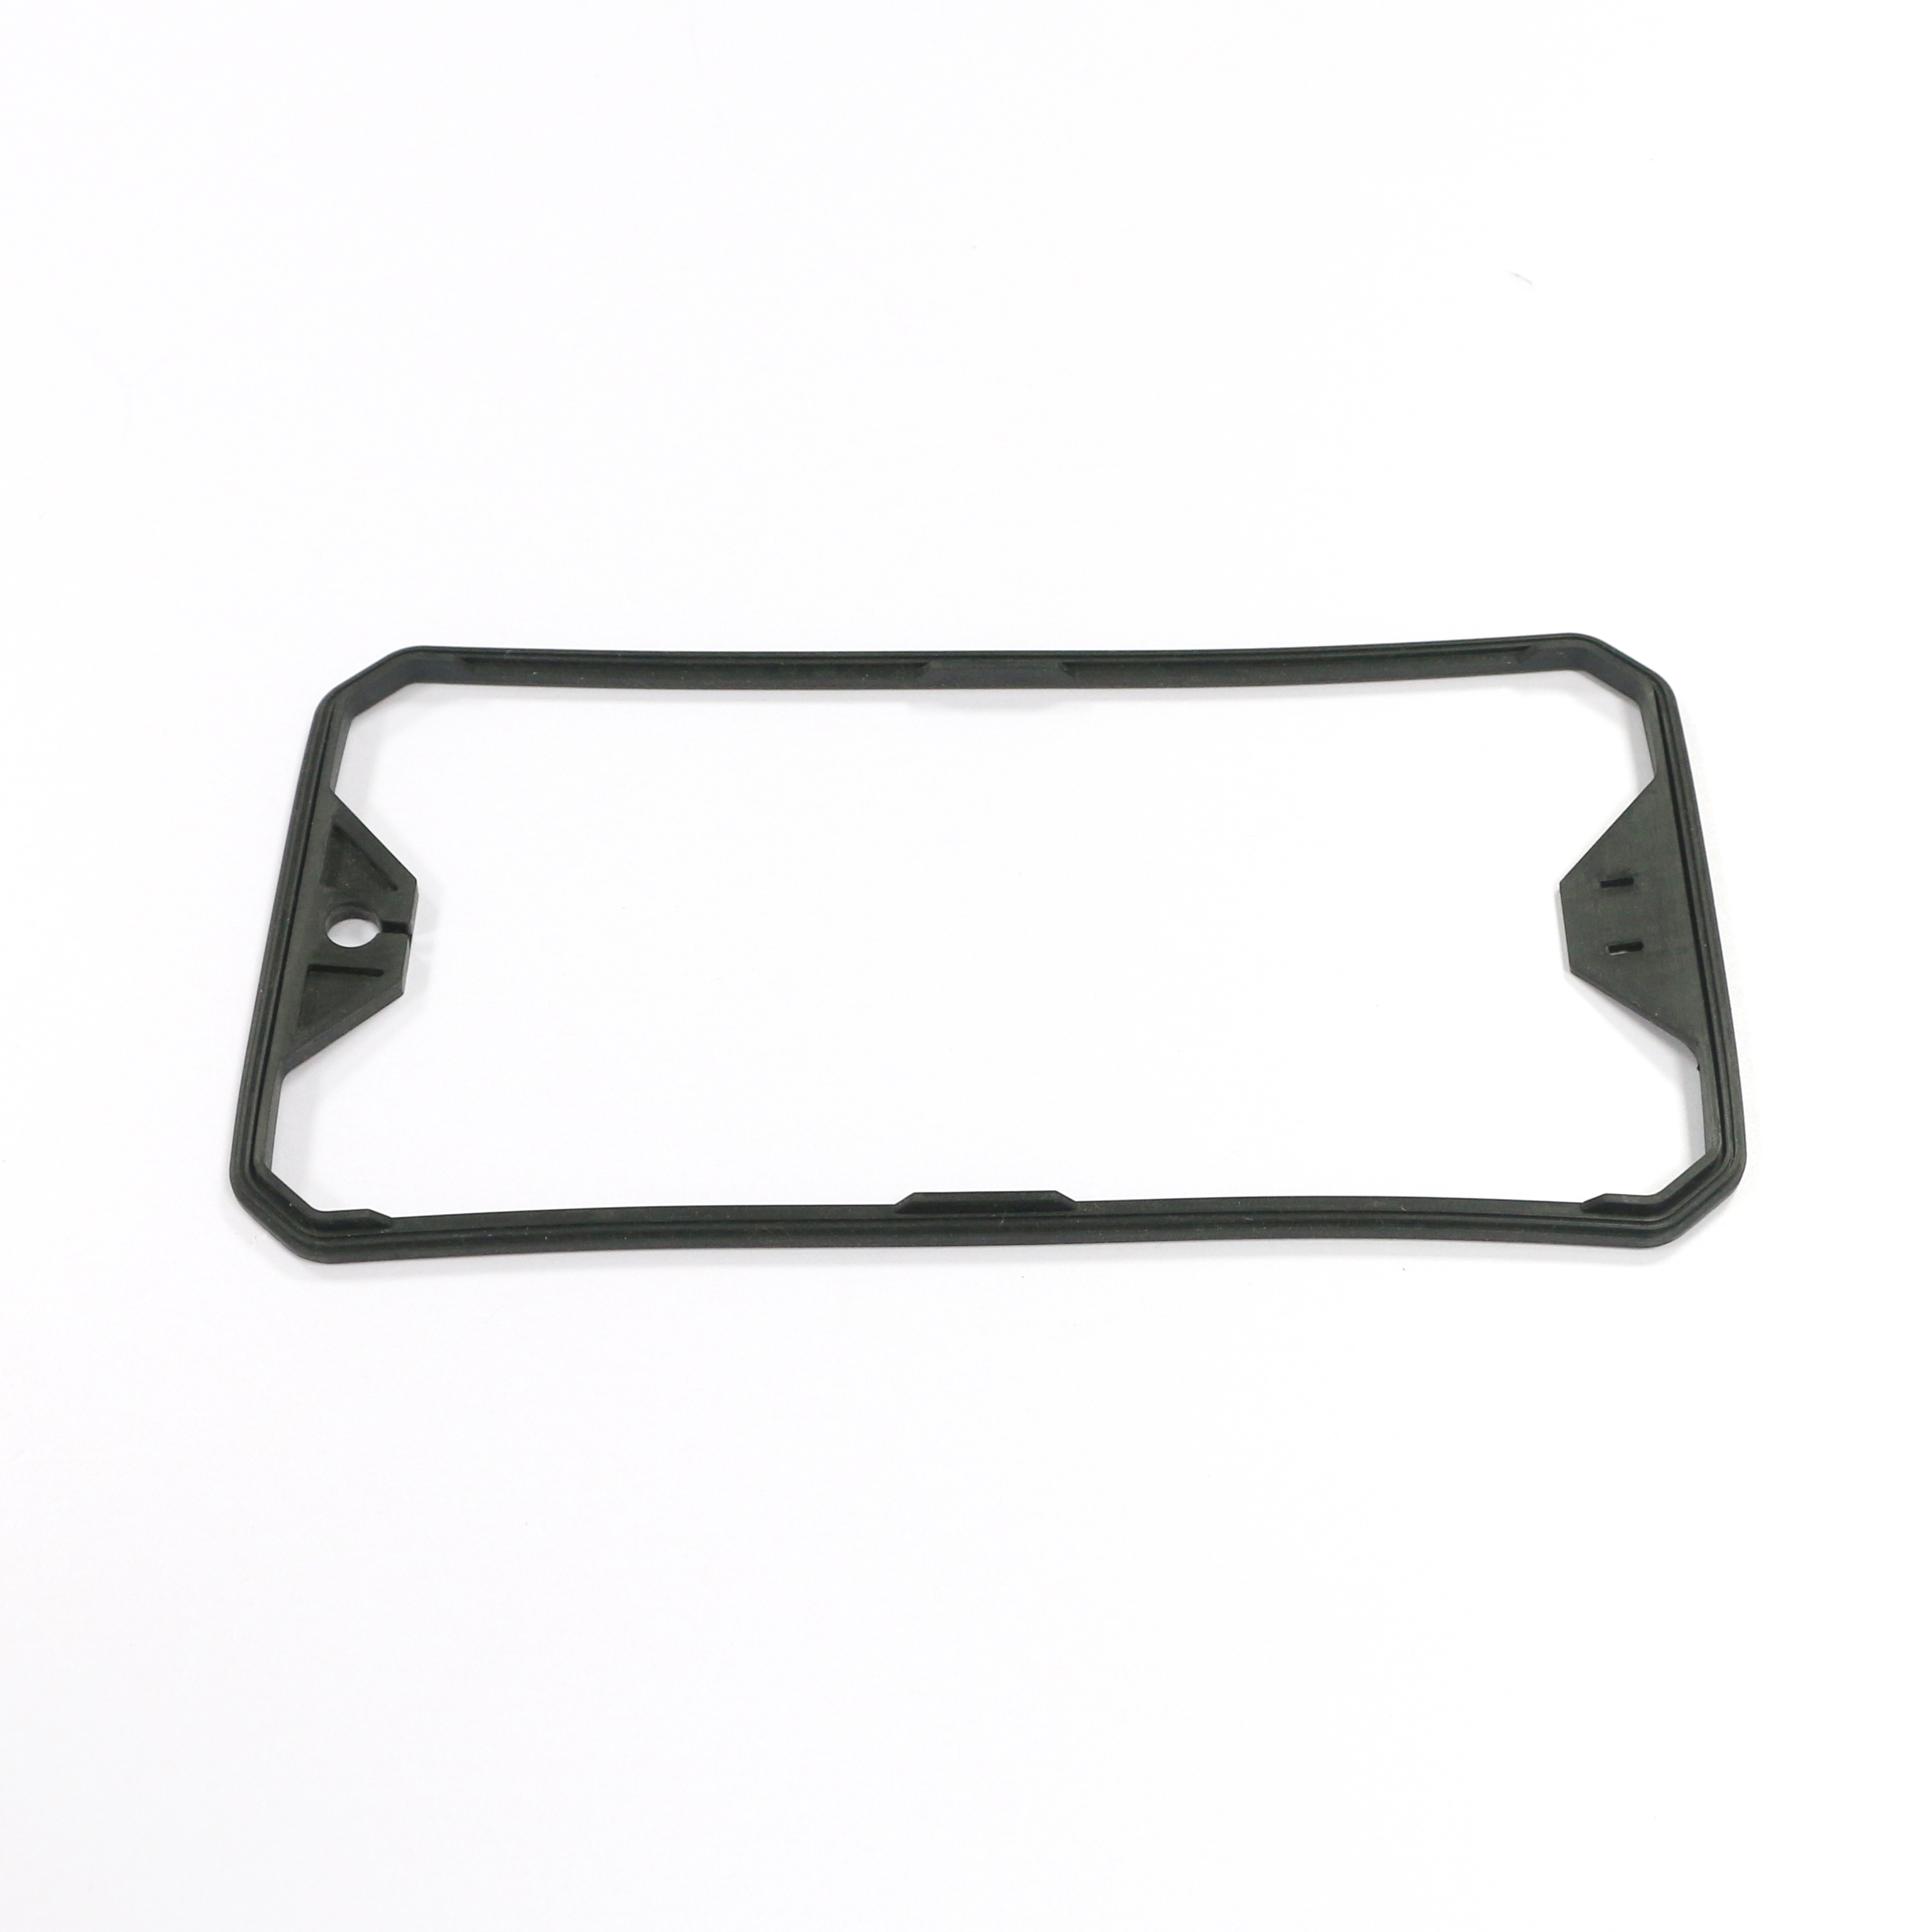 Customized silicone gasket supplier high quality rubber silicone seal gaskets rubber sealing